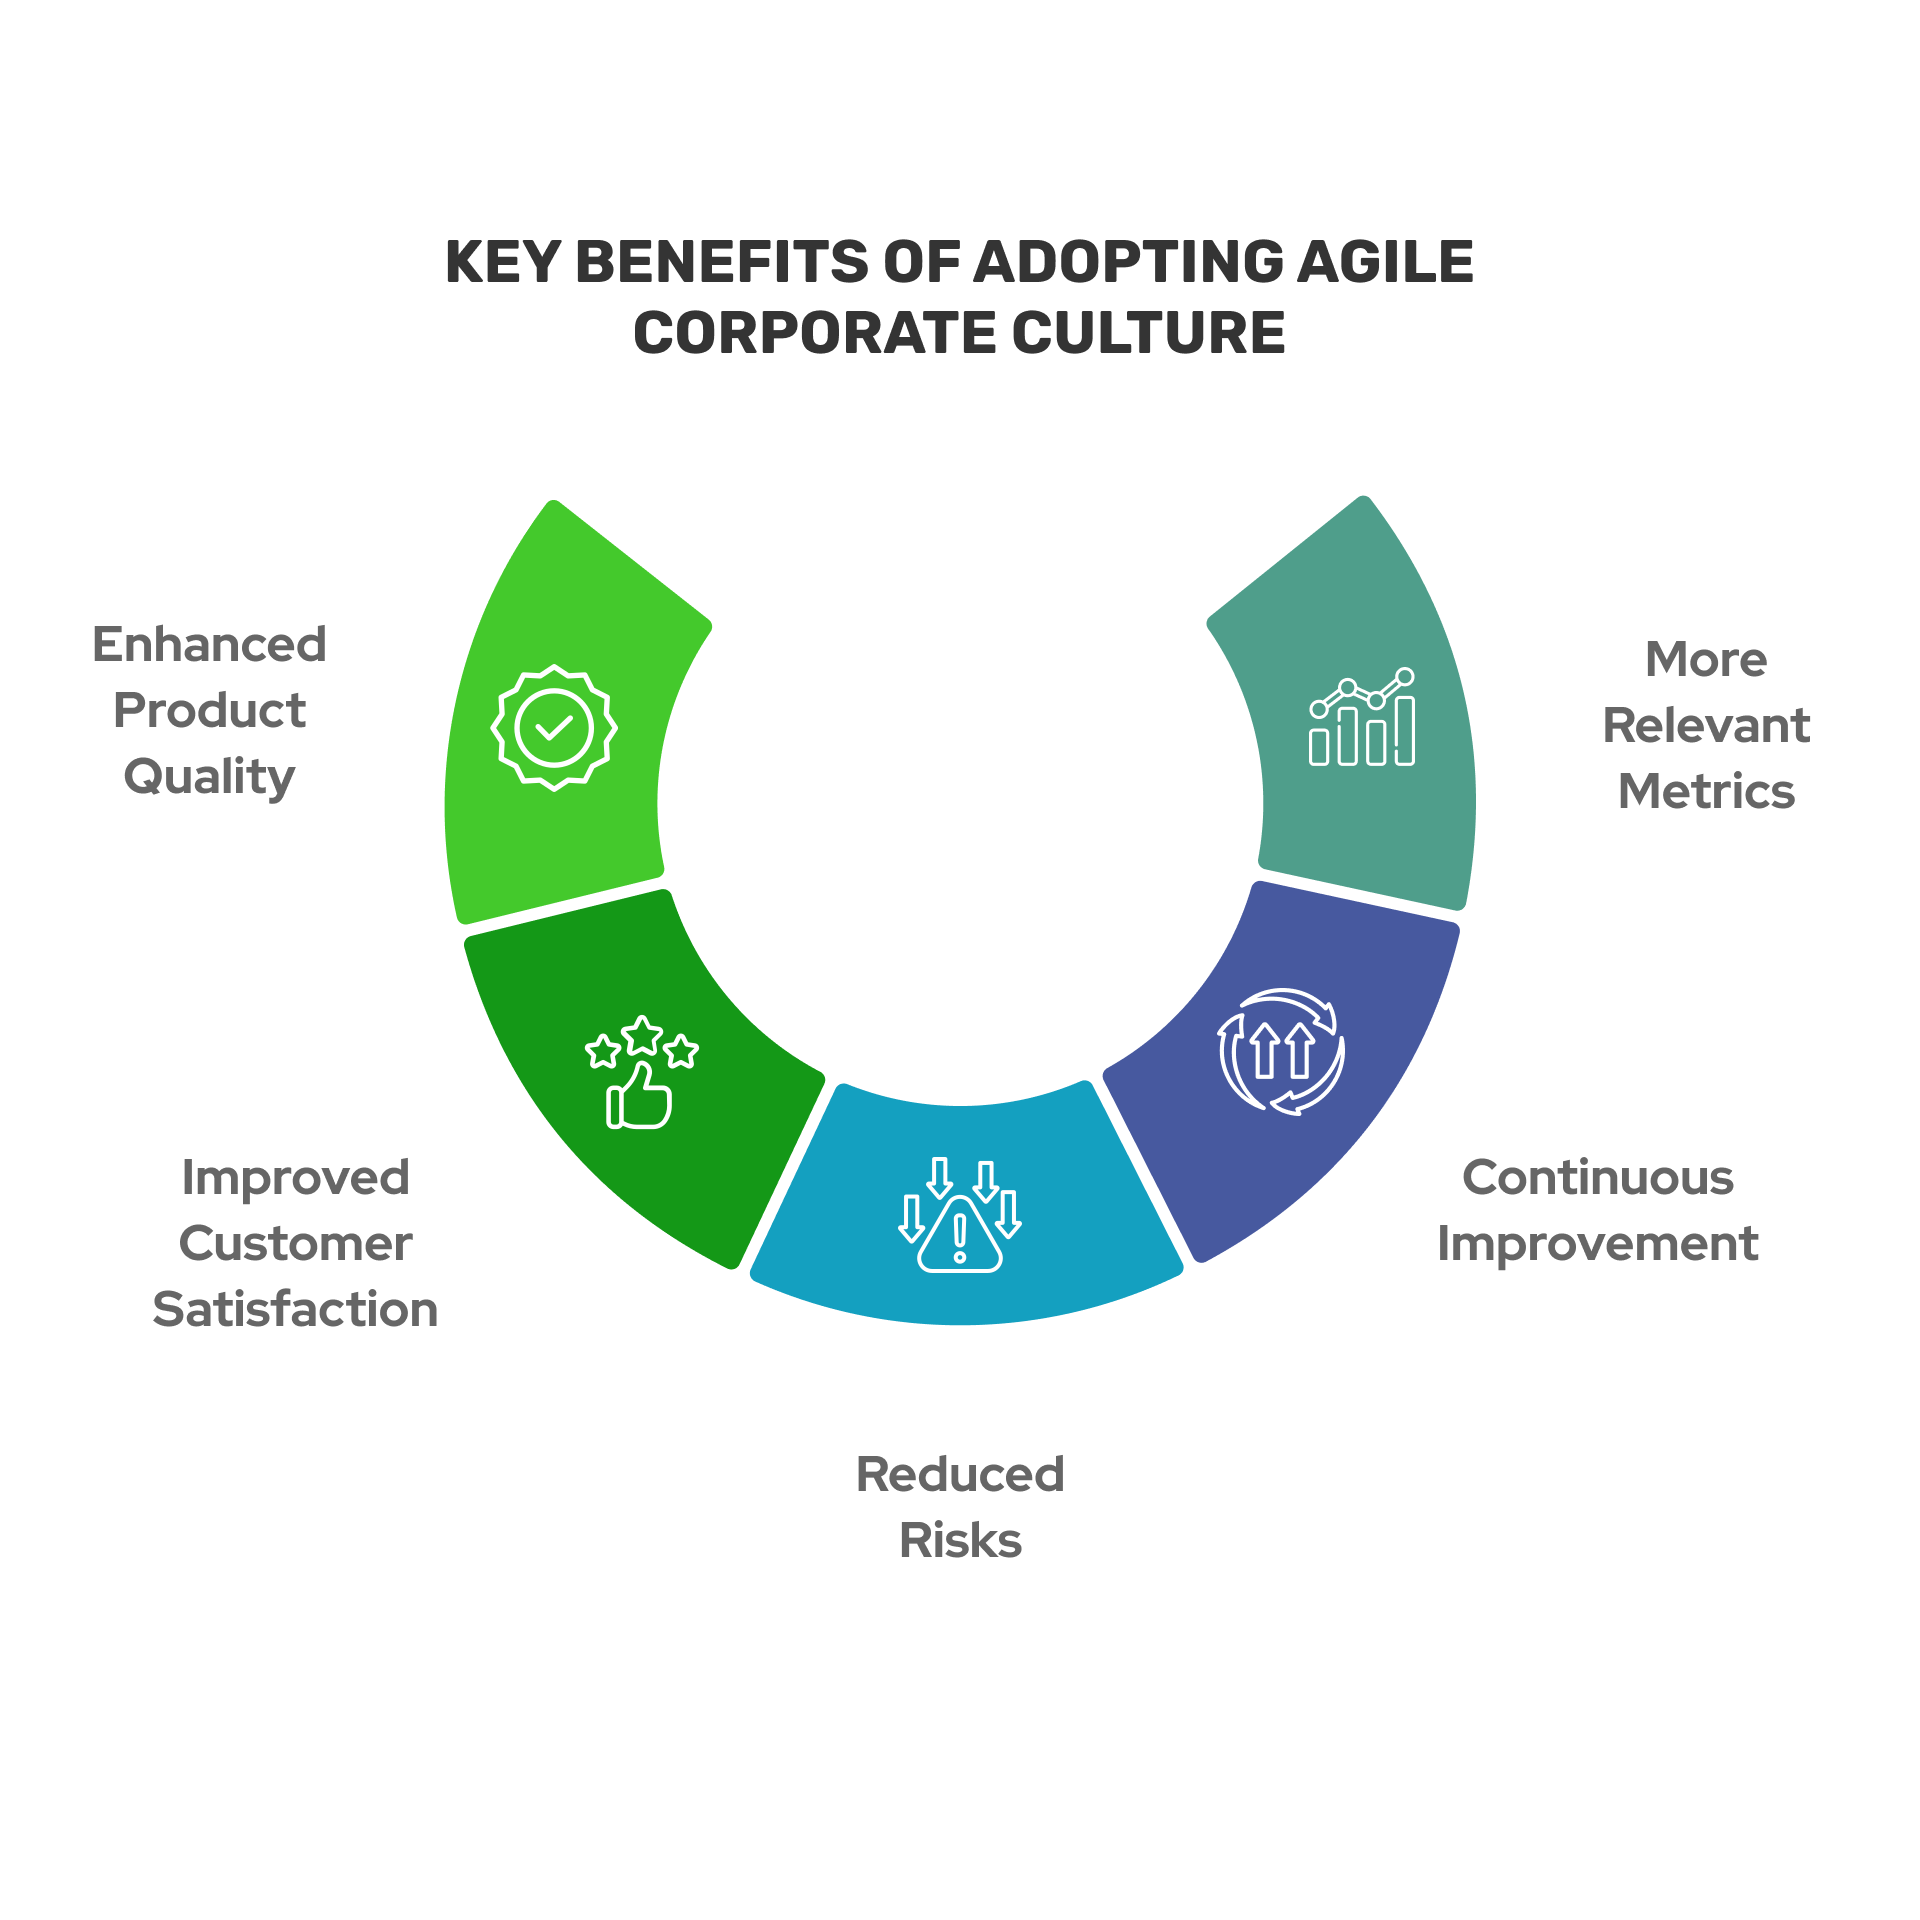 The Agile environment creates favorable conditions for improved collaboration between the customer and development team and enhanced product quality.